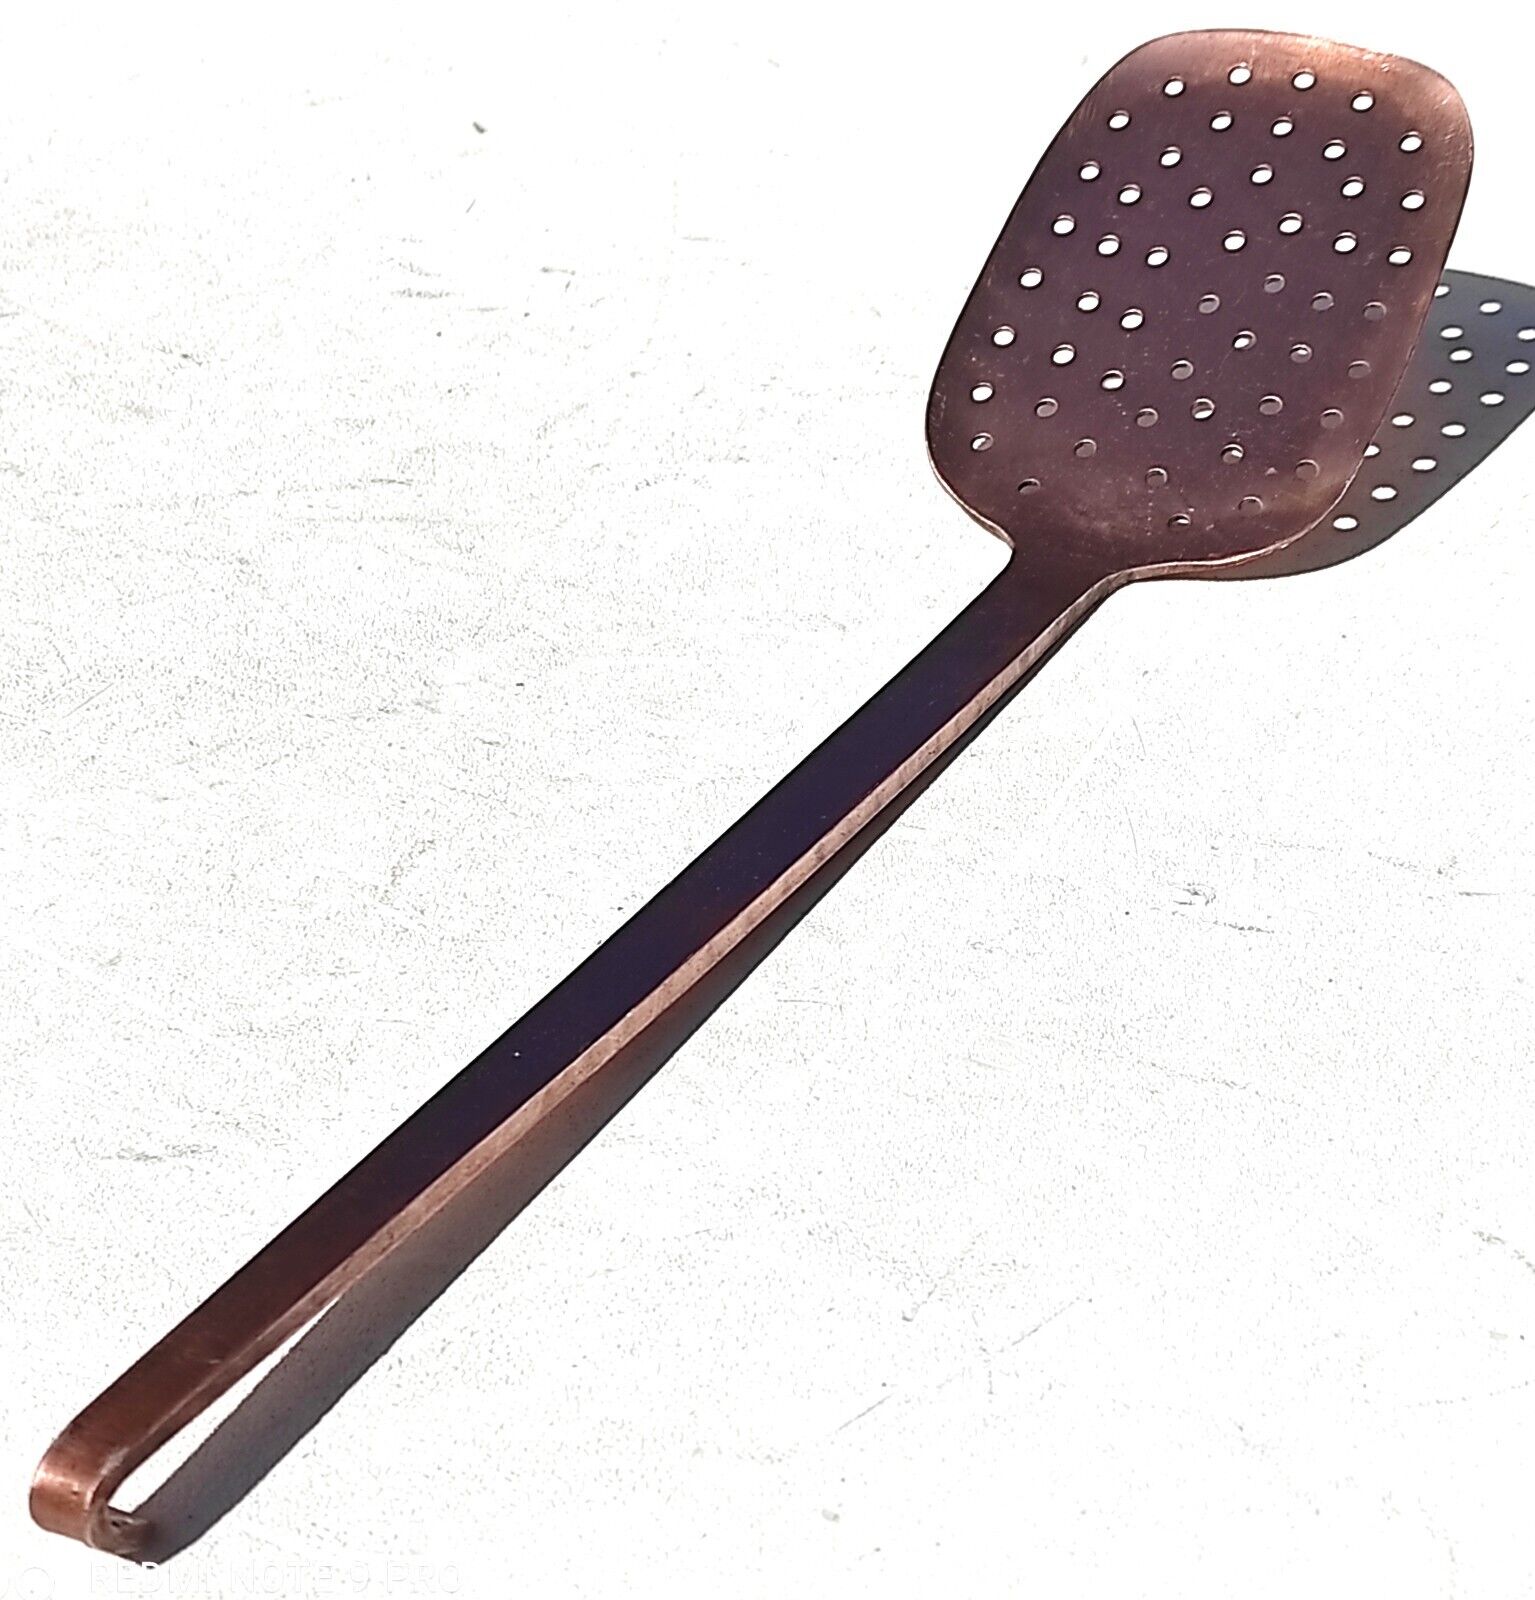 Vintage French 15.7inch Copper Ladle Sieve Strainer With Hook 5mm Gift Idea